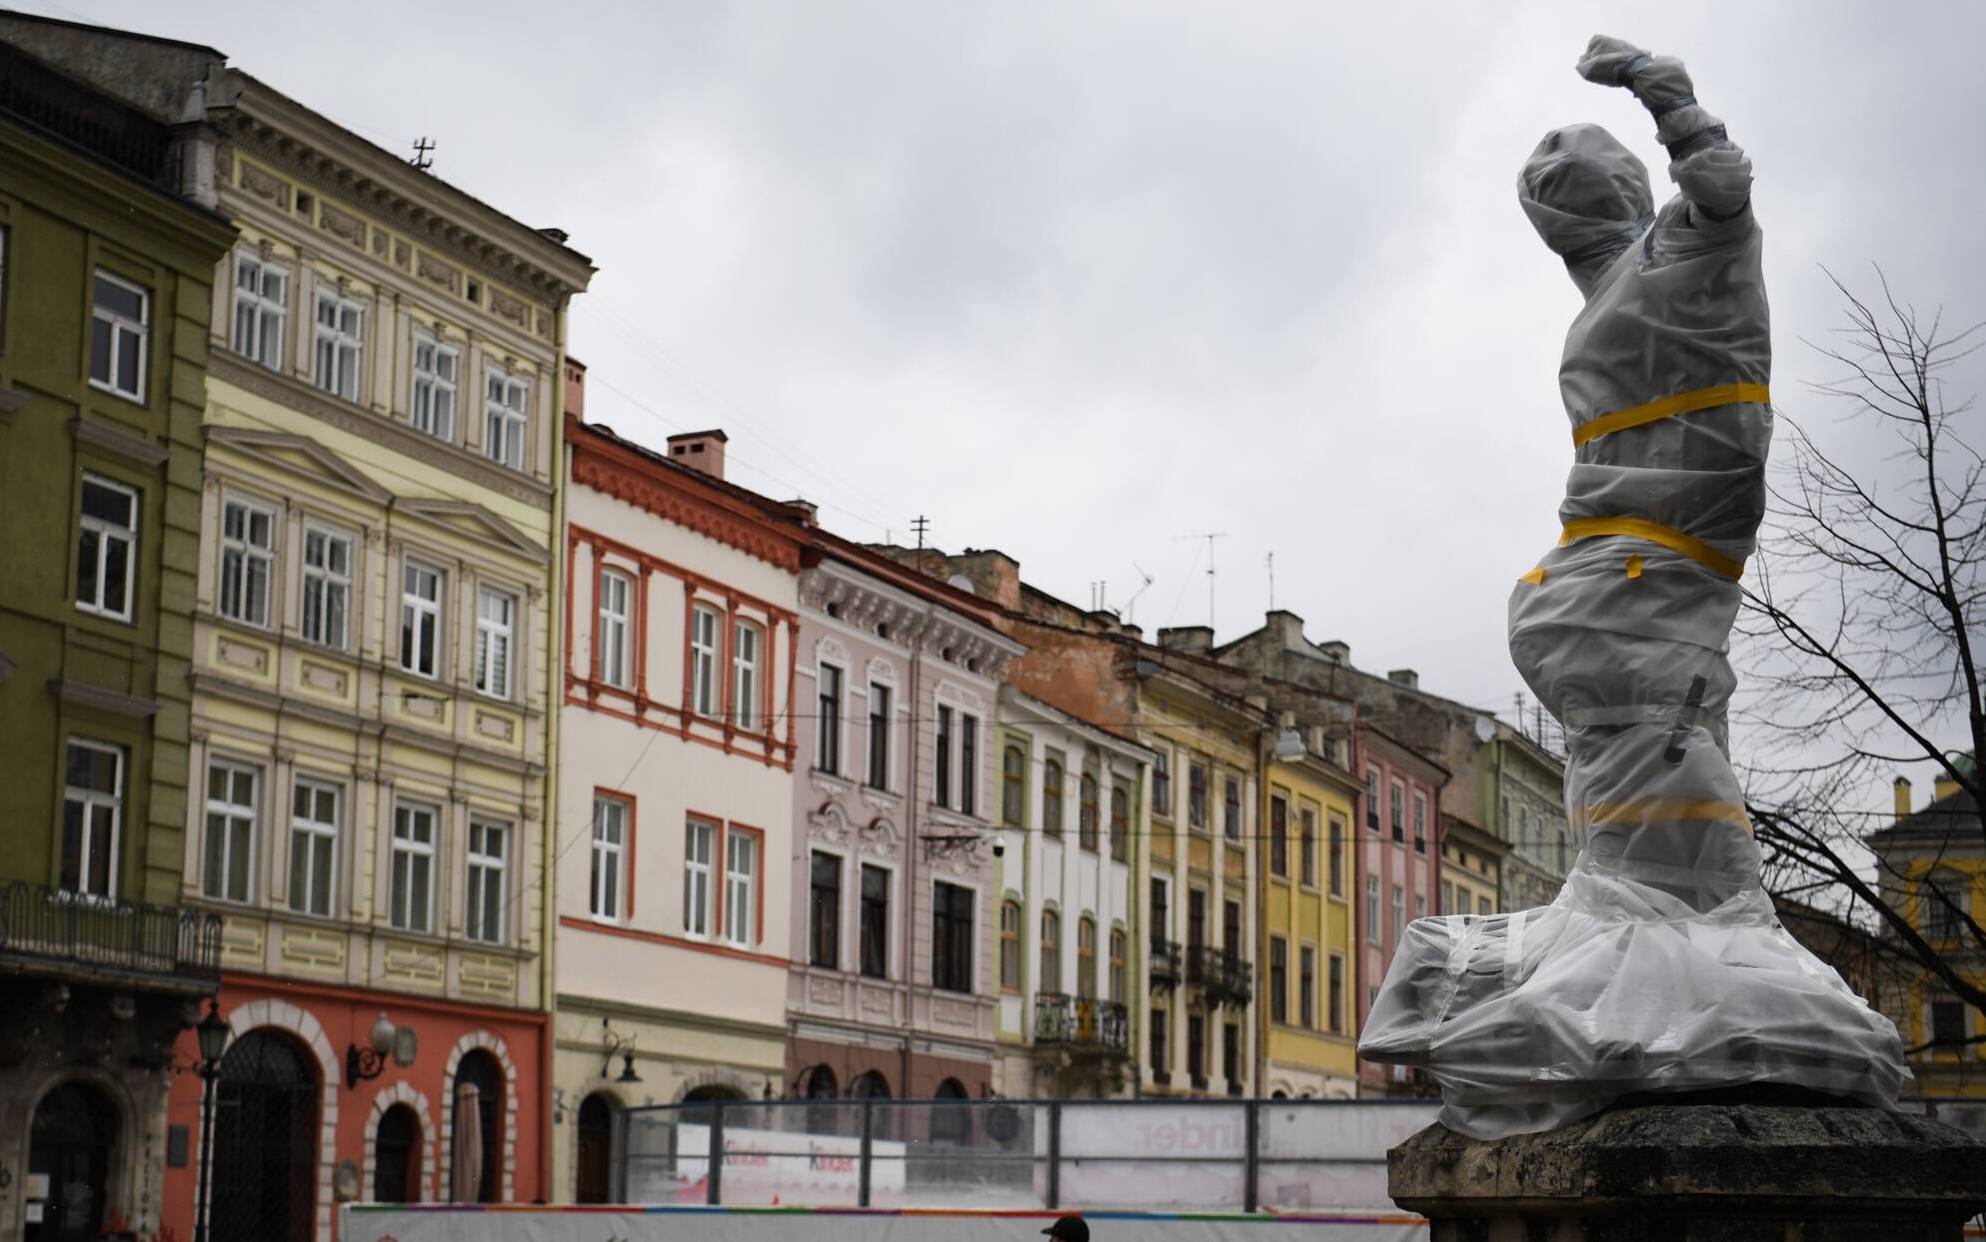 Pedestrians walk past a wrapped statue near the city council in Lviv western Ukraine, on March 5, 2022. (Photo by Daniel LEAL / AFP)